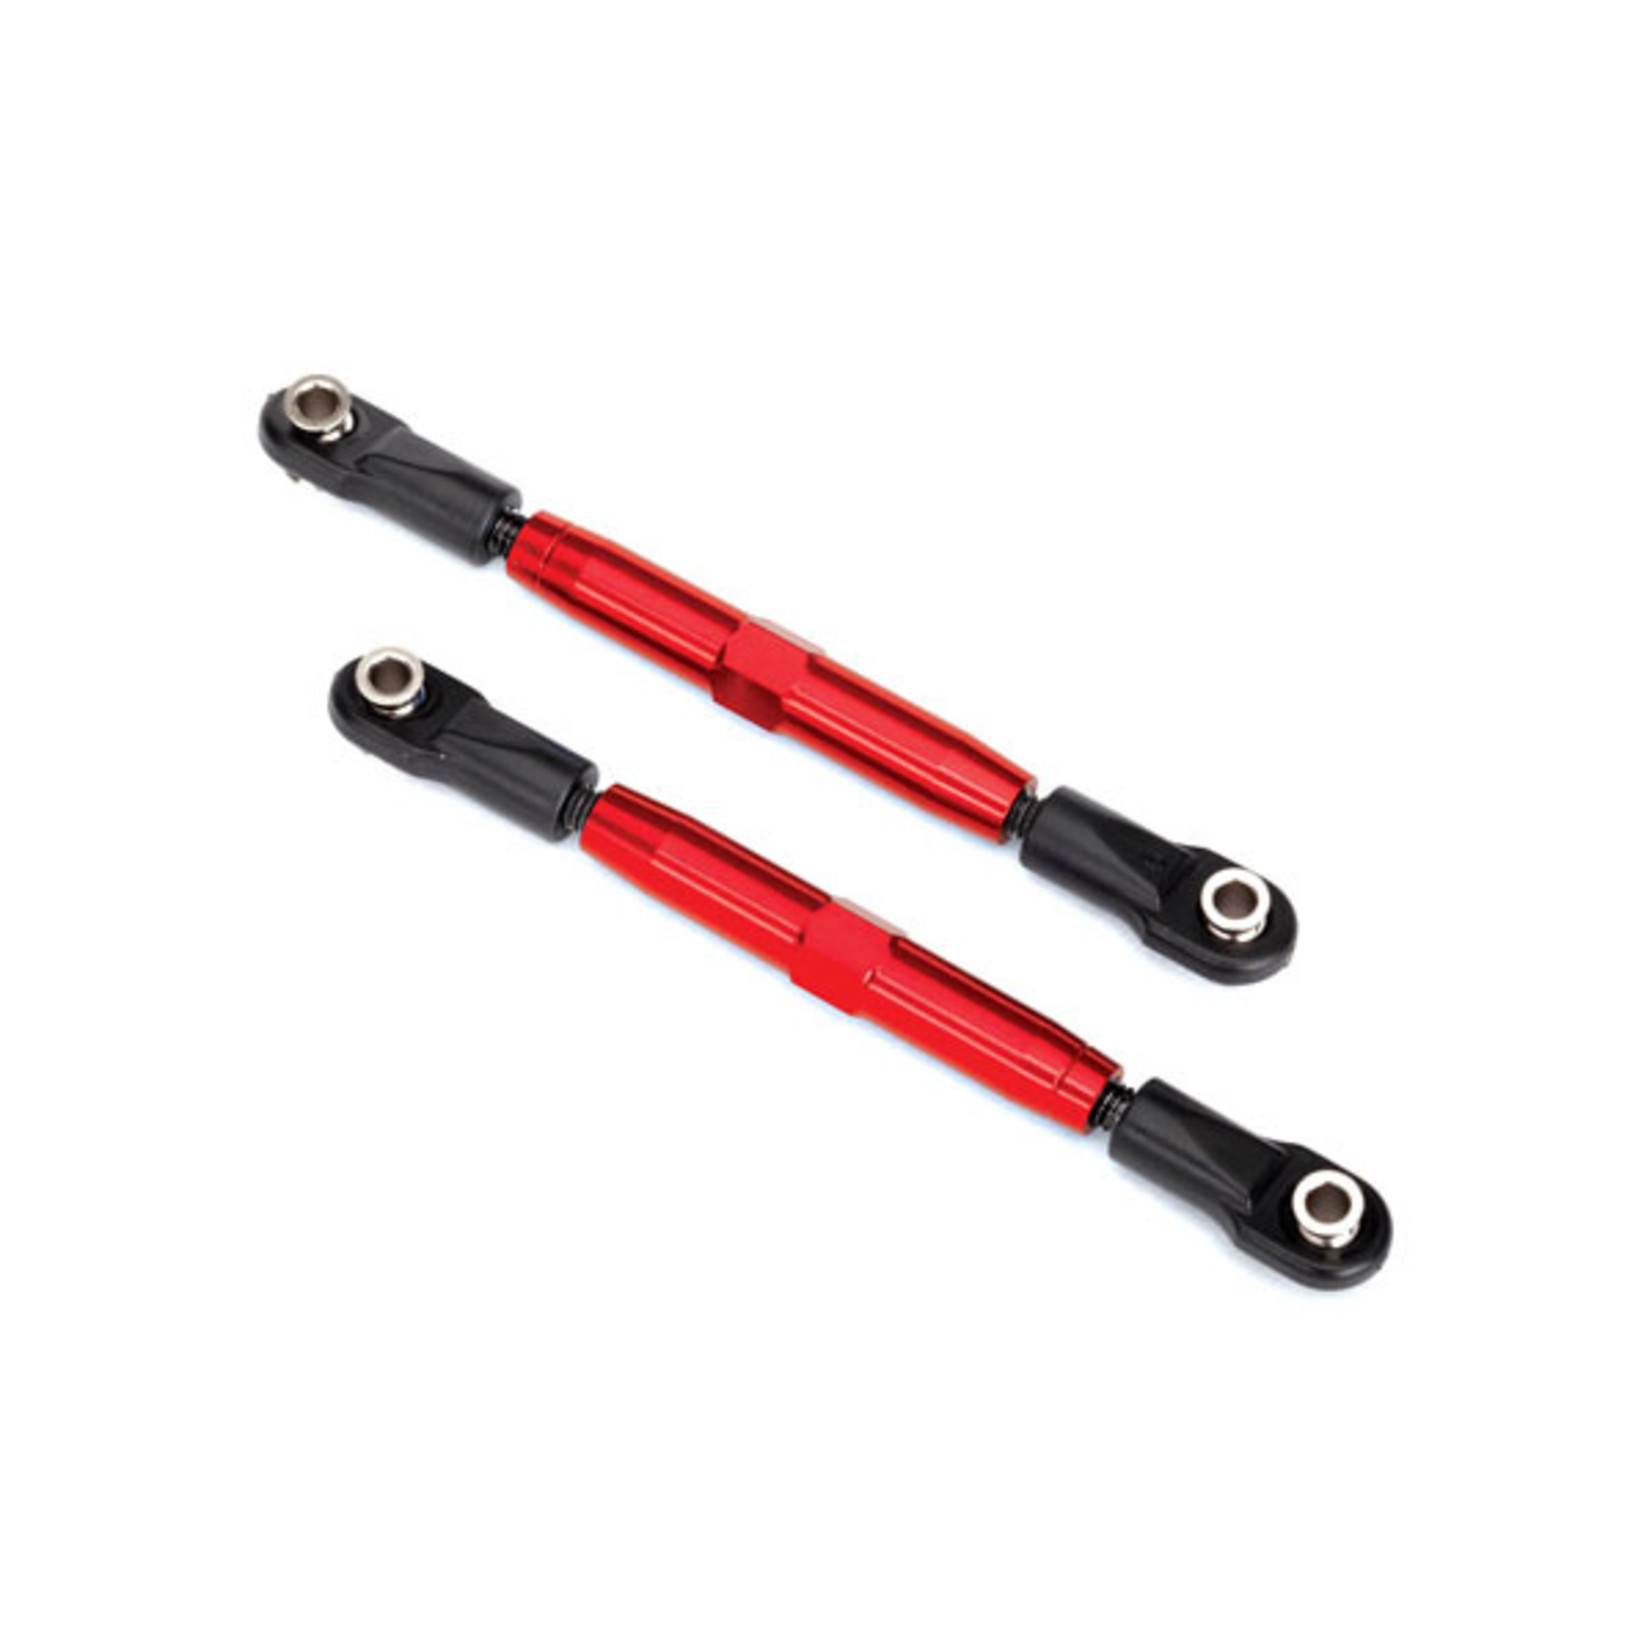 Traxxas 3643R - Camber links, front (TUBES red-anodized, 7075-T